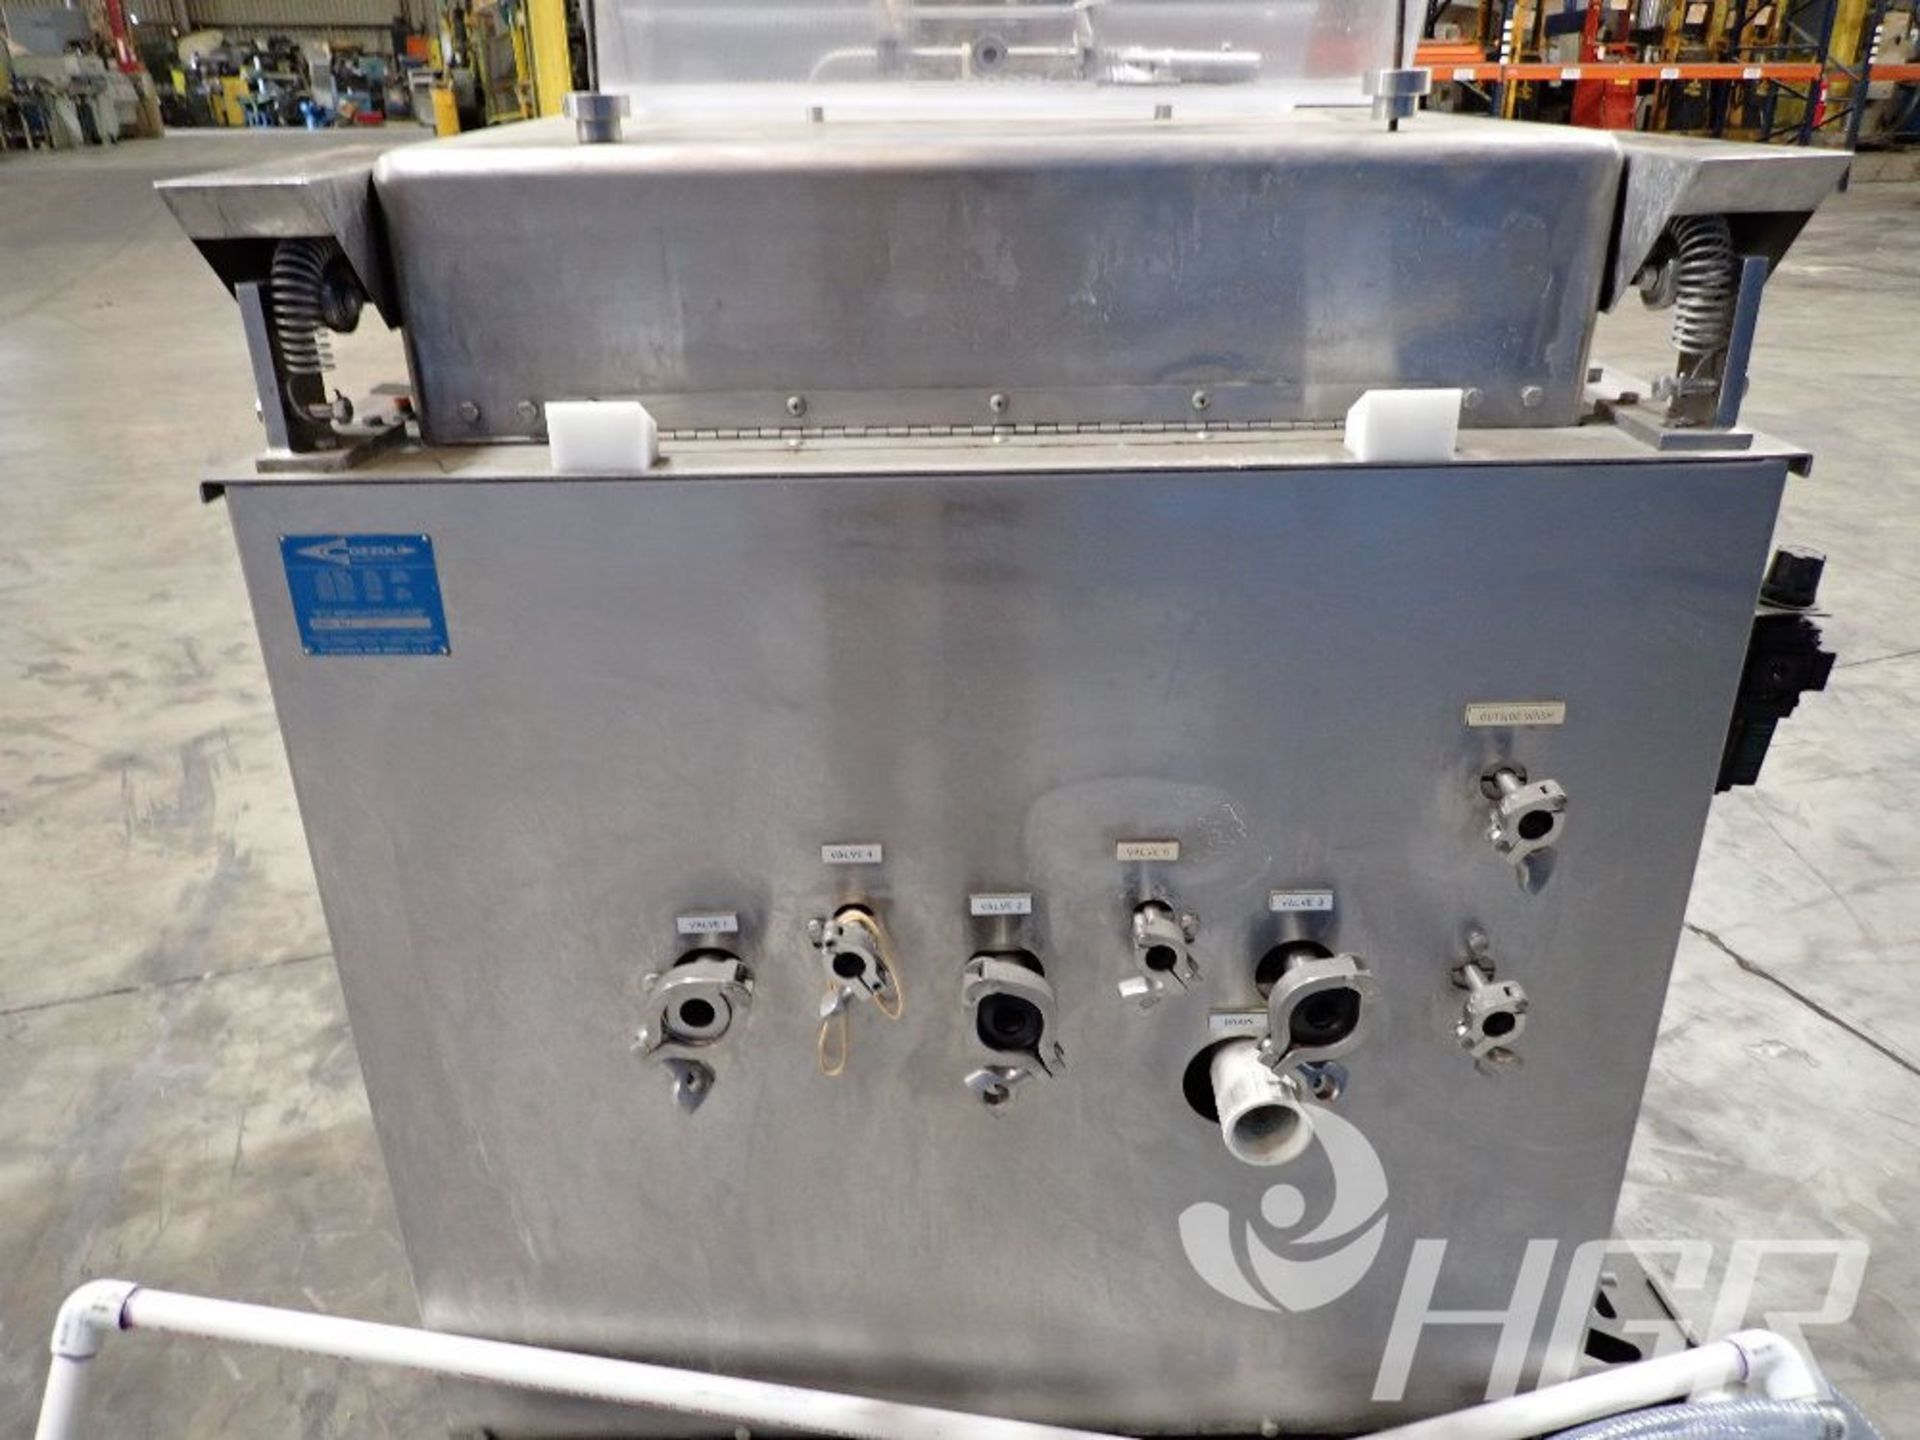 COZZOLI CLEANING STATION, Model n/a, Date: n/a; s/n GW24-242, Approx. Capacity: 21X15, Power: n/a, - Image 14 of 16